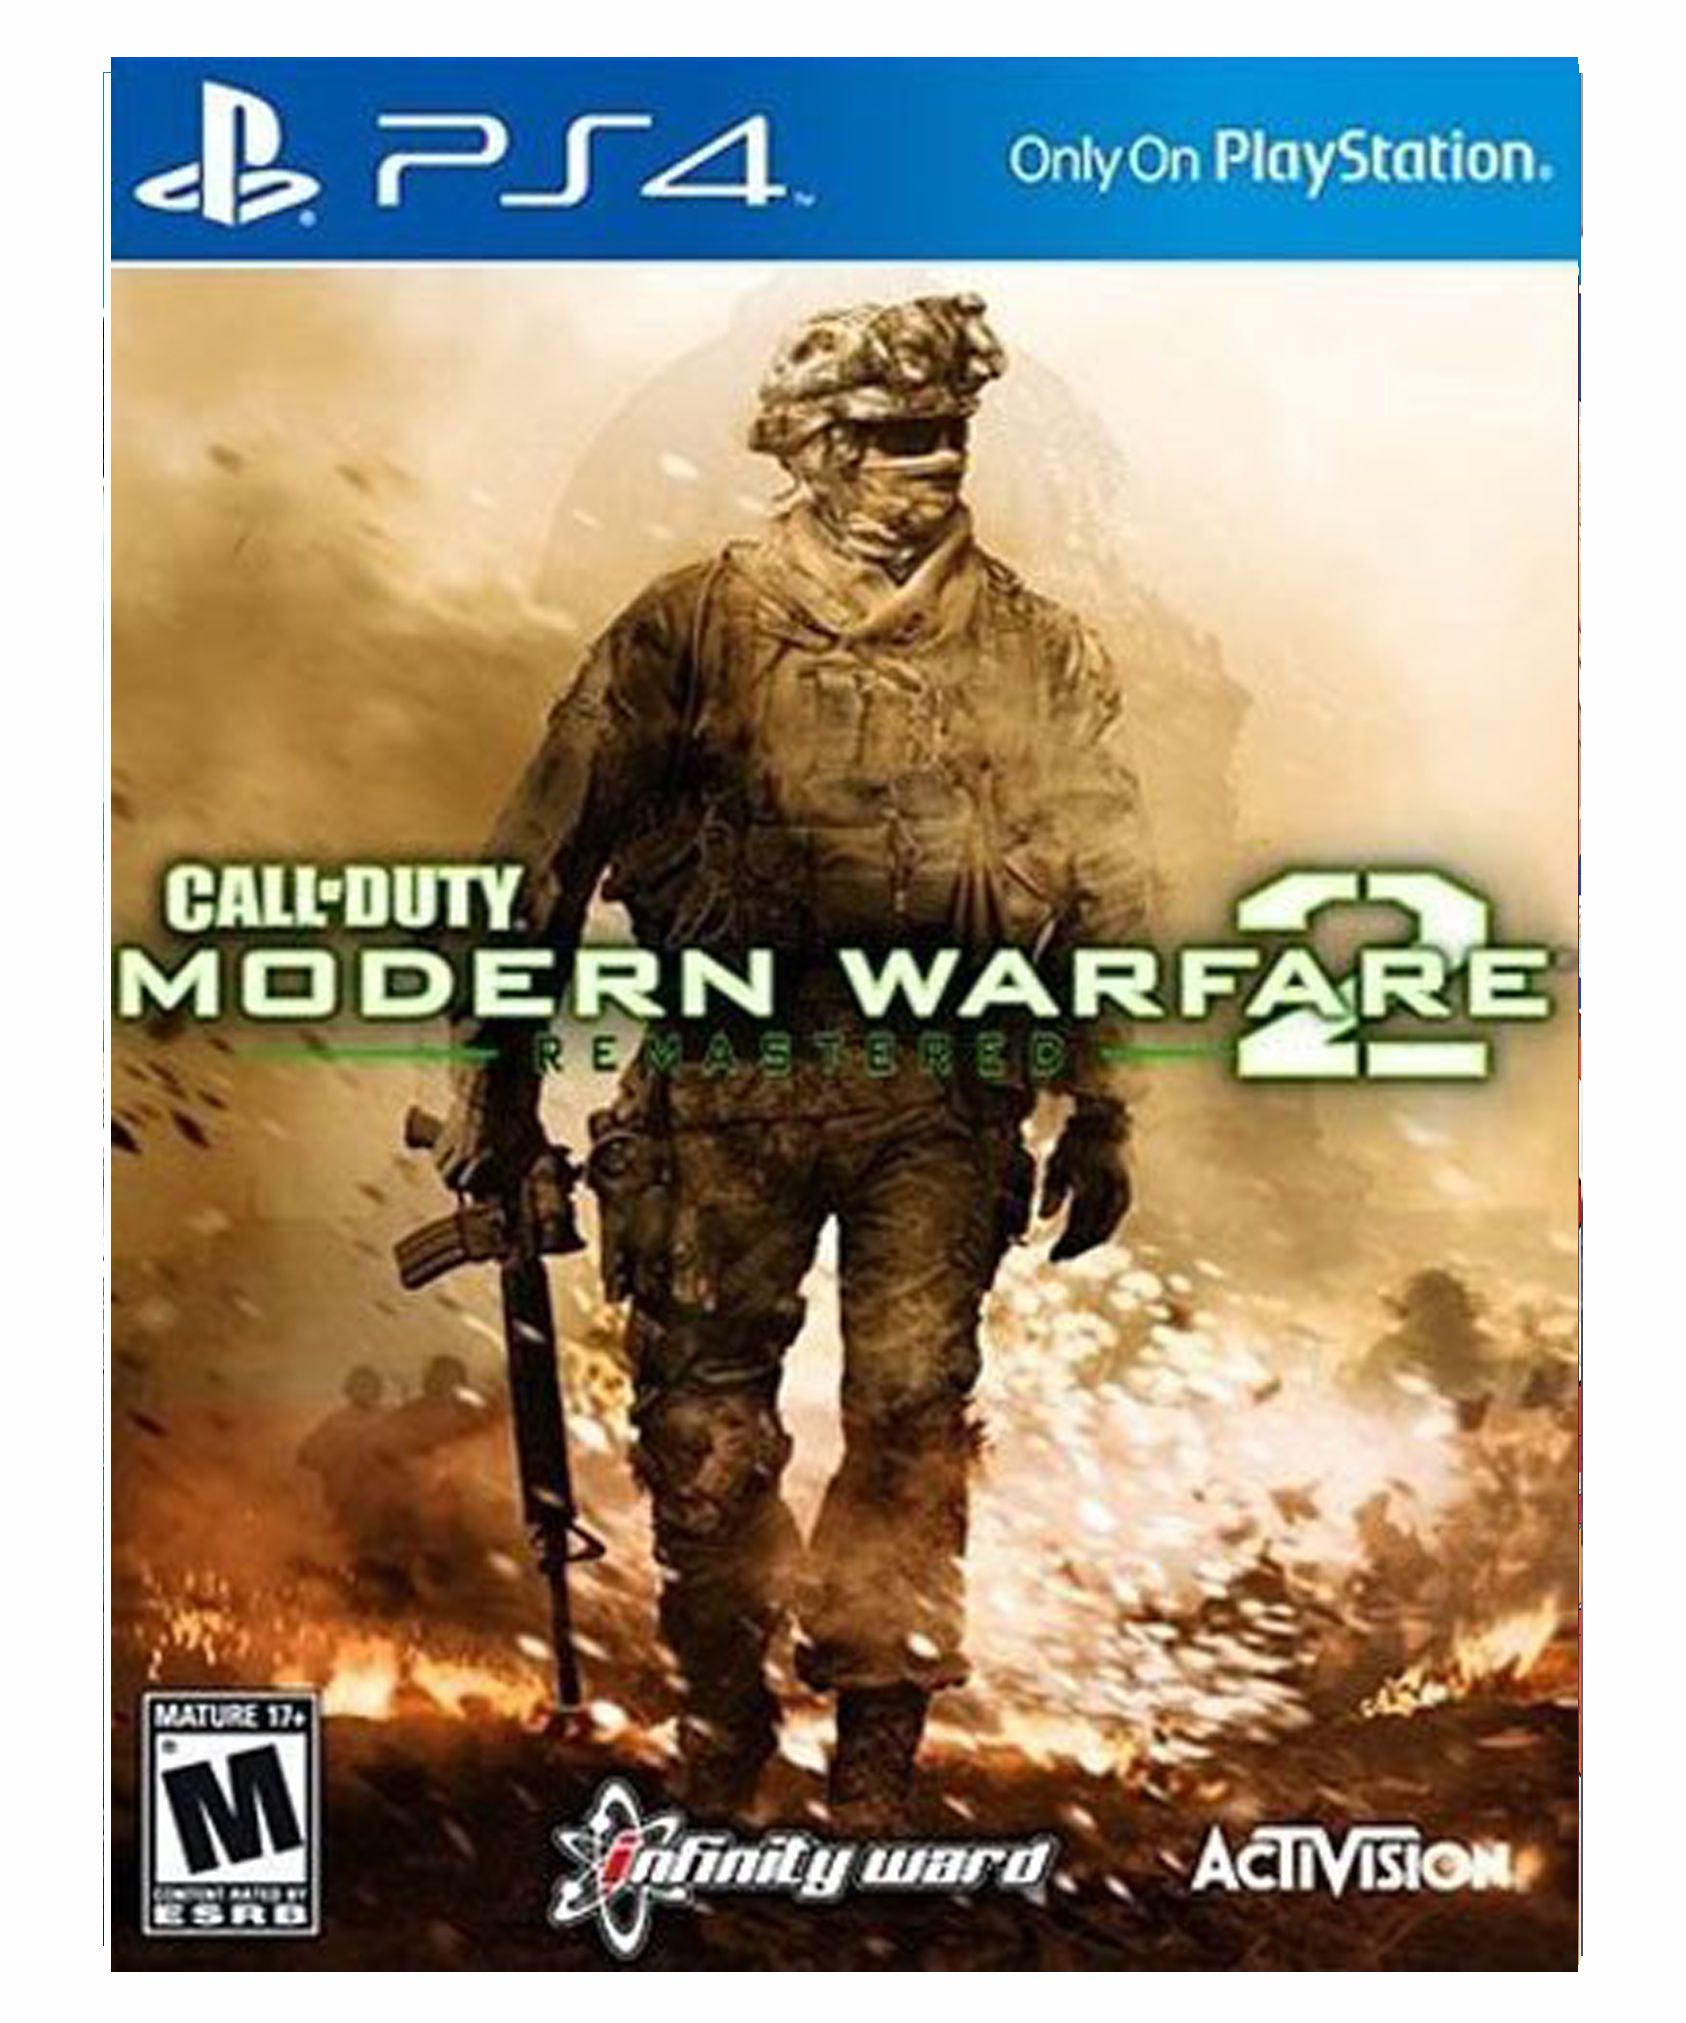 Call Of Duty: Modern Warfare 2 Campaign Remastered - PS4